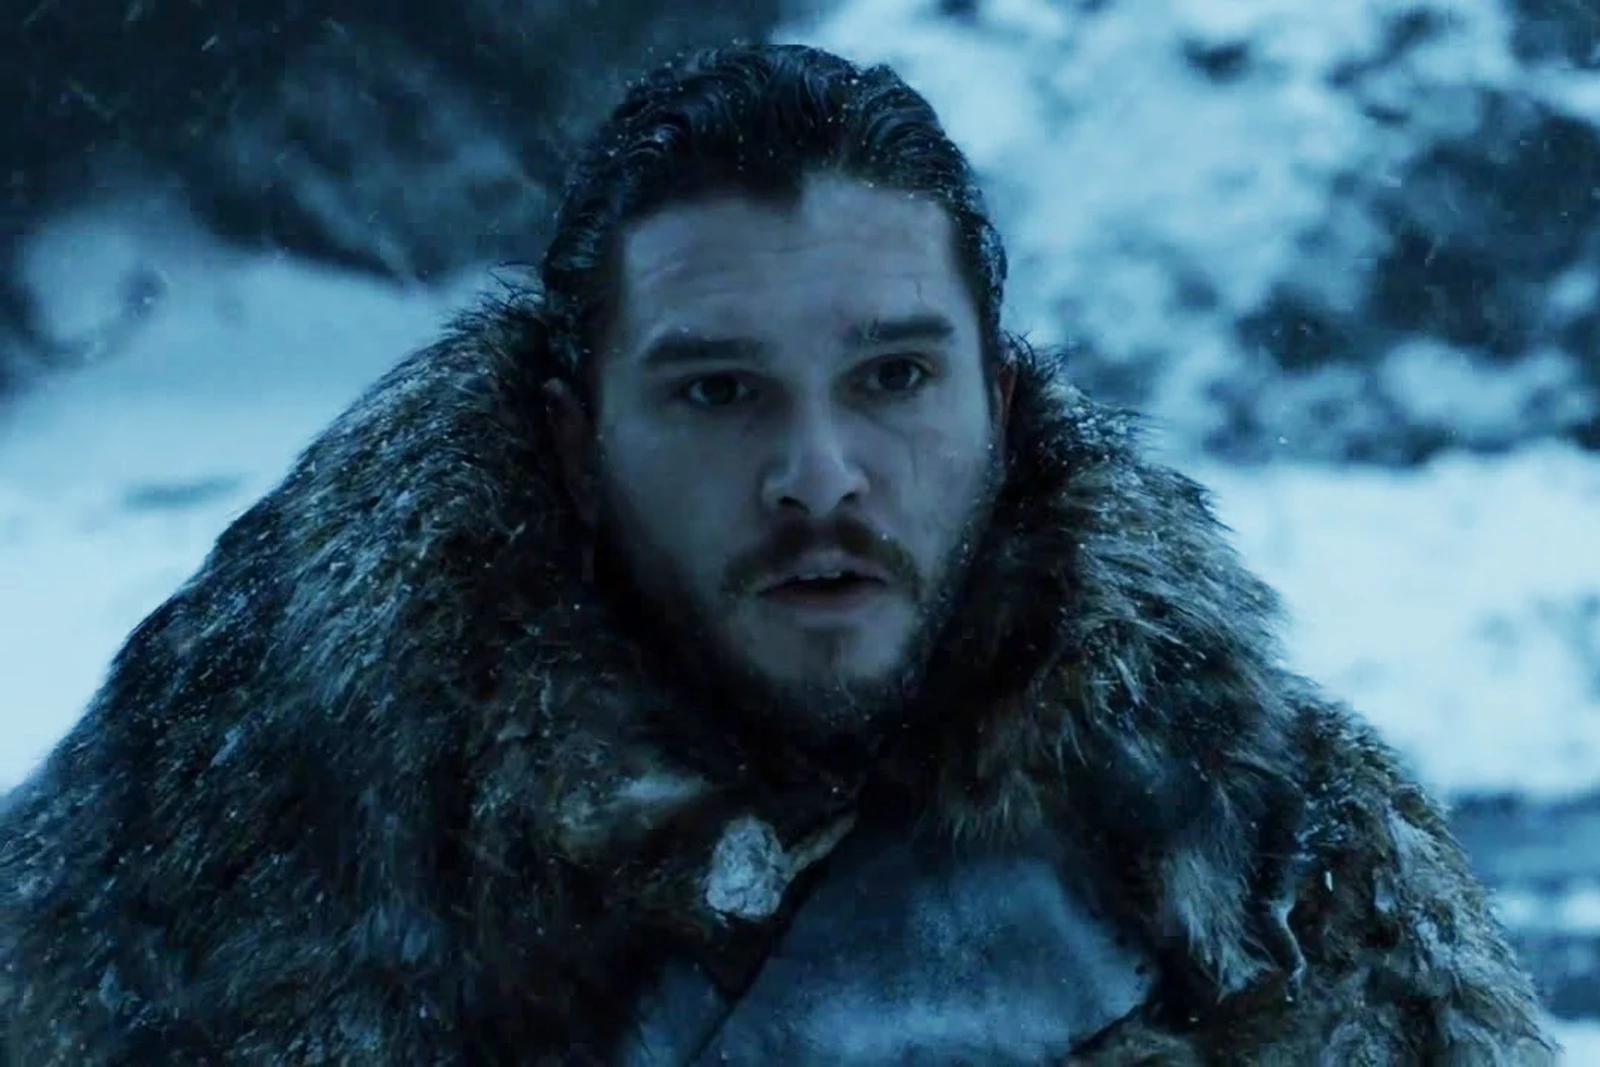 HBO Hacked — 'Game of Thrones' Scripts & Other Episodes Leaked Online